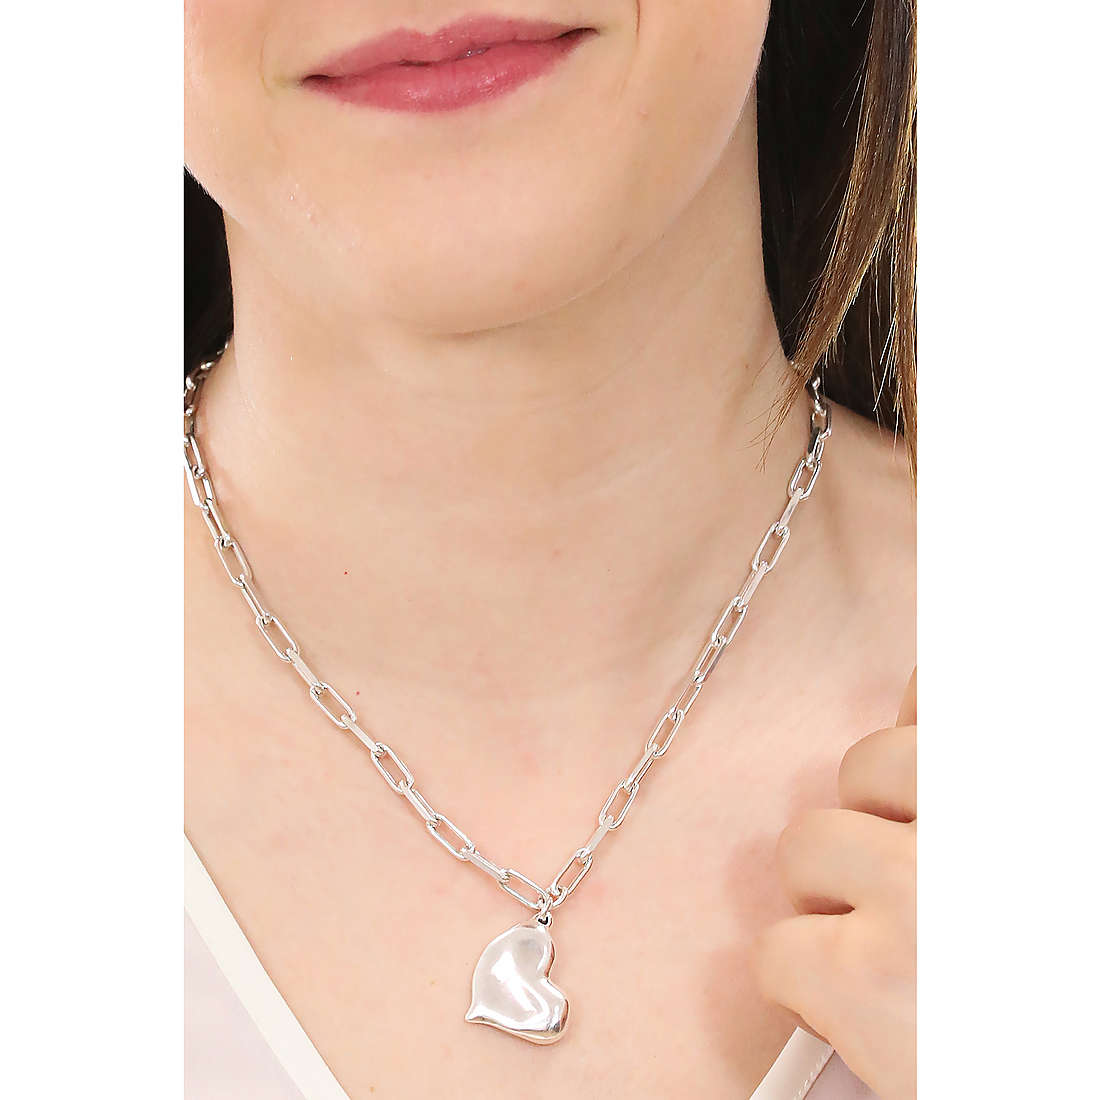 UnoDe50 necklaces Emotions woman COL1669MTL0000U photo wearing